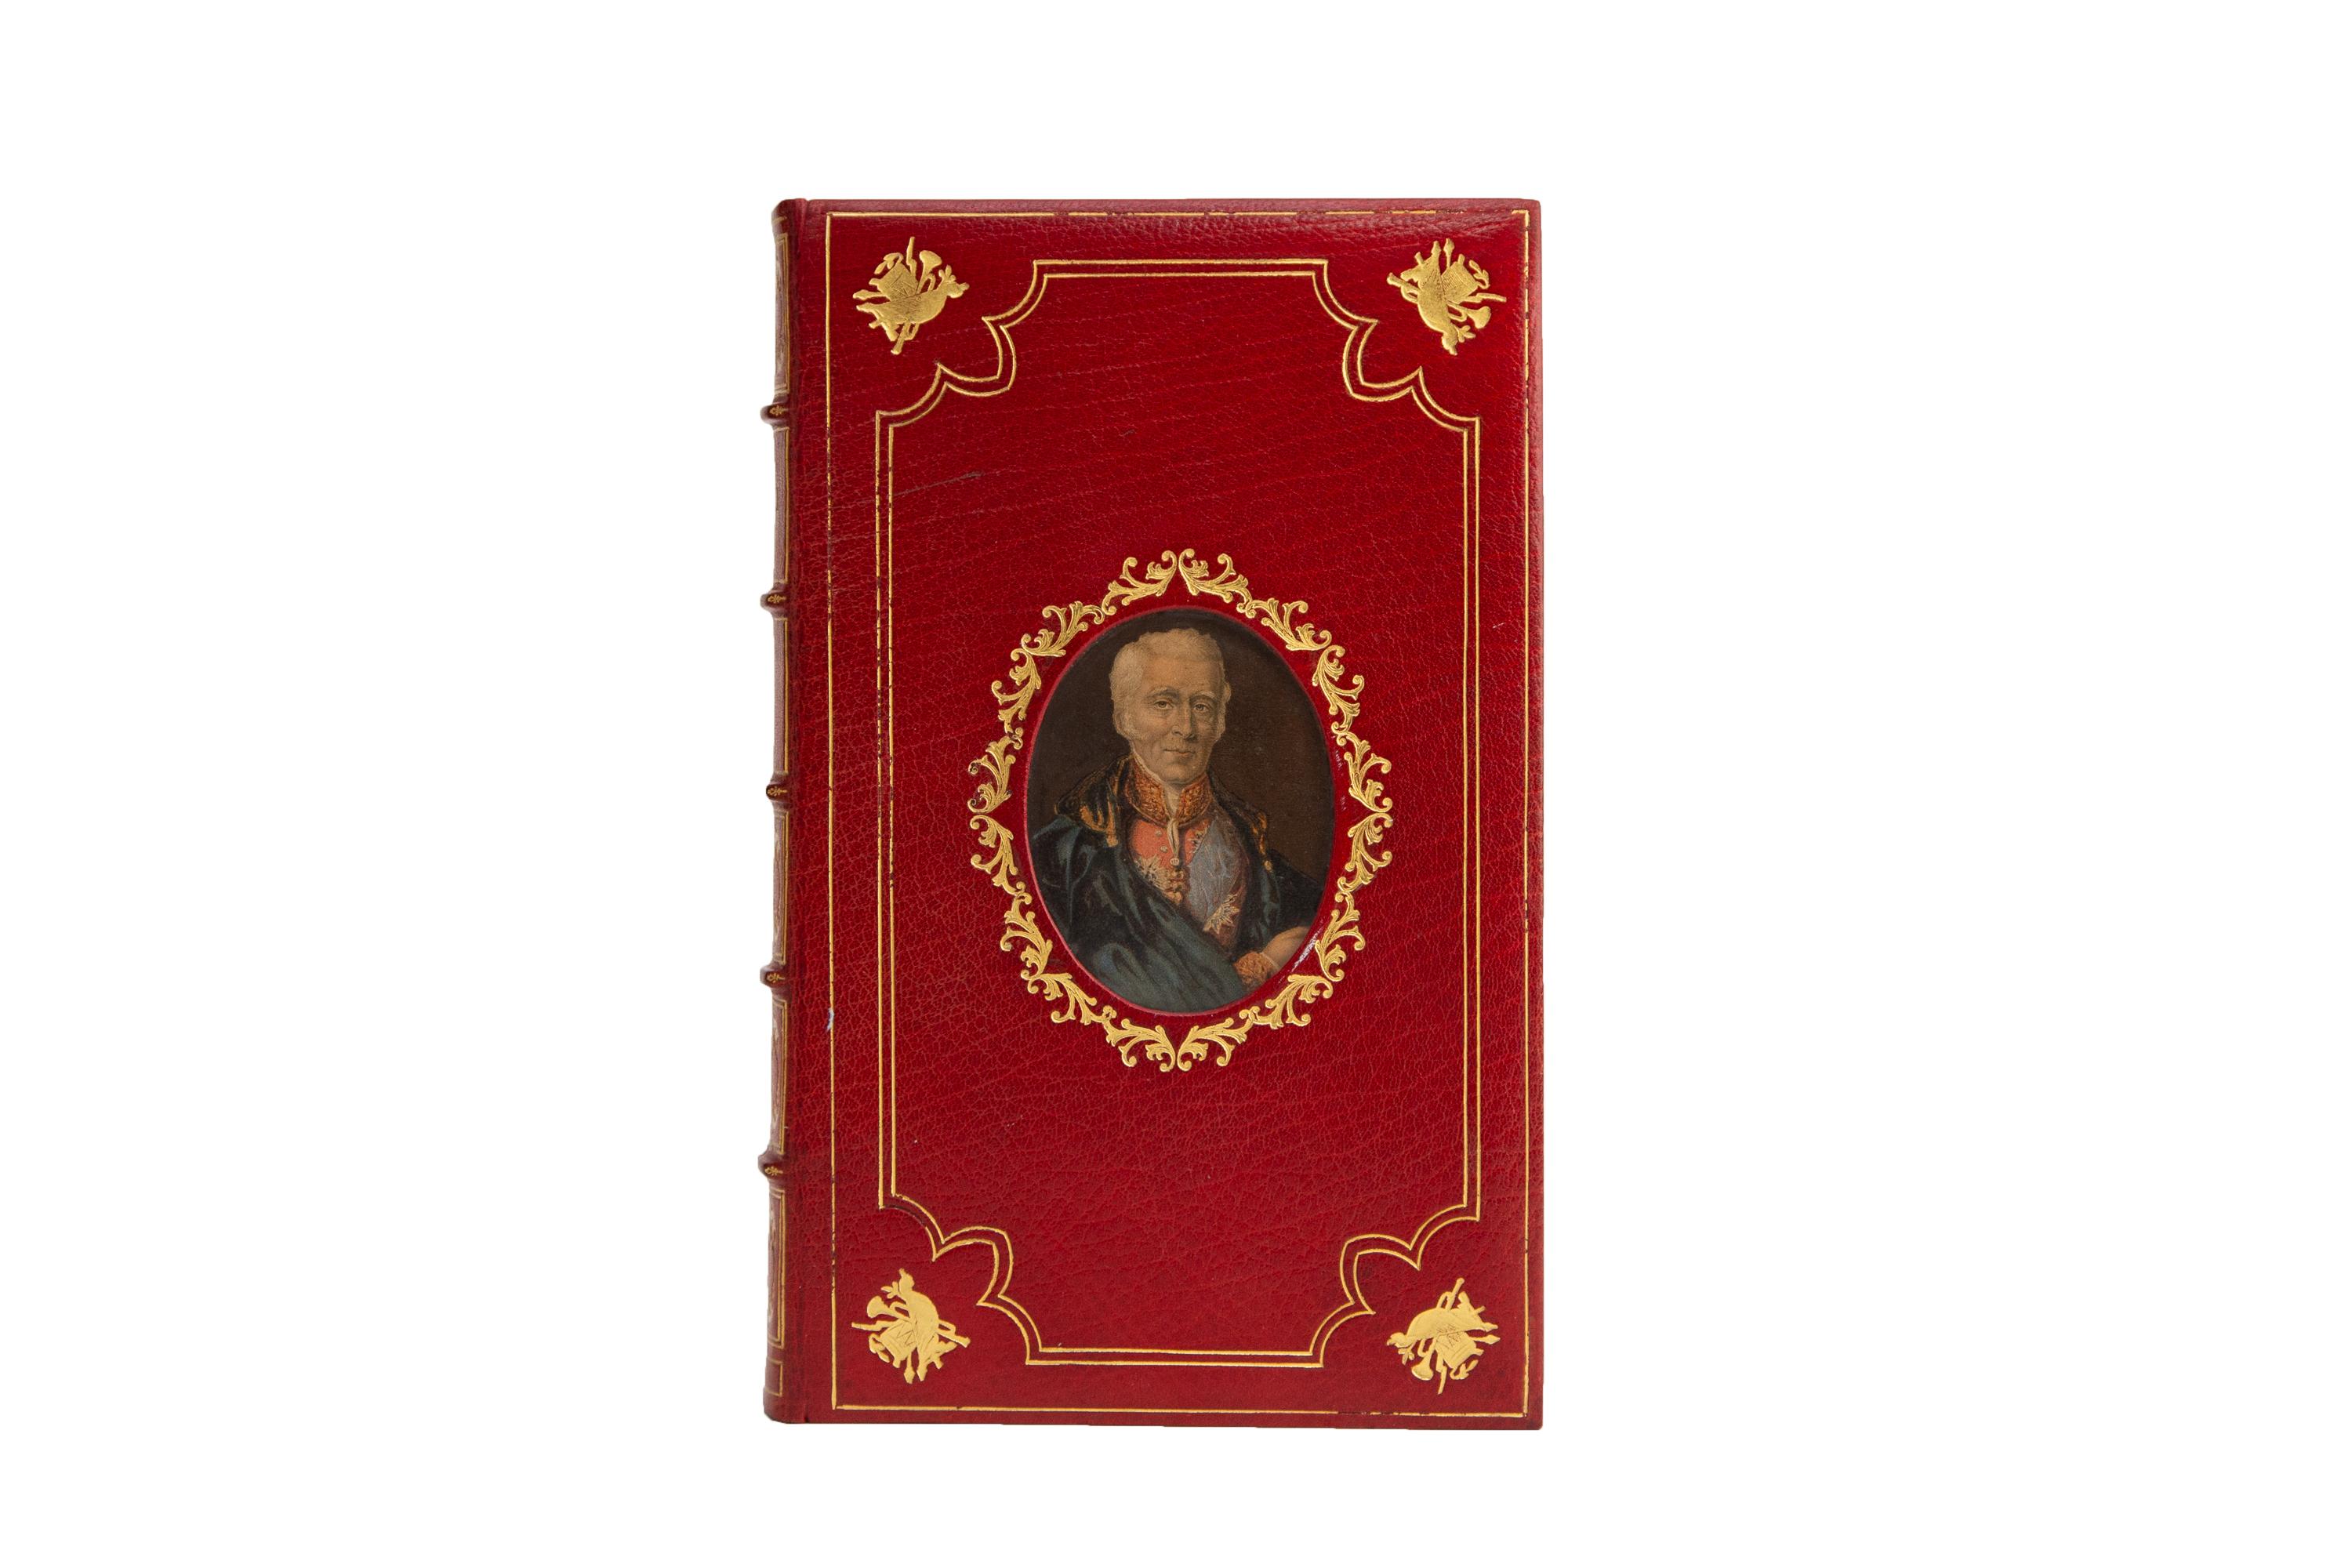 1 Volume. Philip Guedalla, The Duke. A Cosway-style binding by Bayntun. Bound in full red morocco with the front board displaying an insert portrait in color, bordered in a wreath of intricate tooling, and the front and back boards displaying gilt